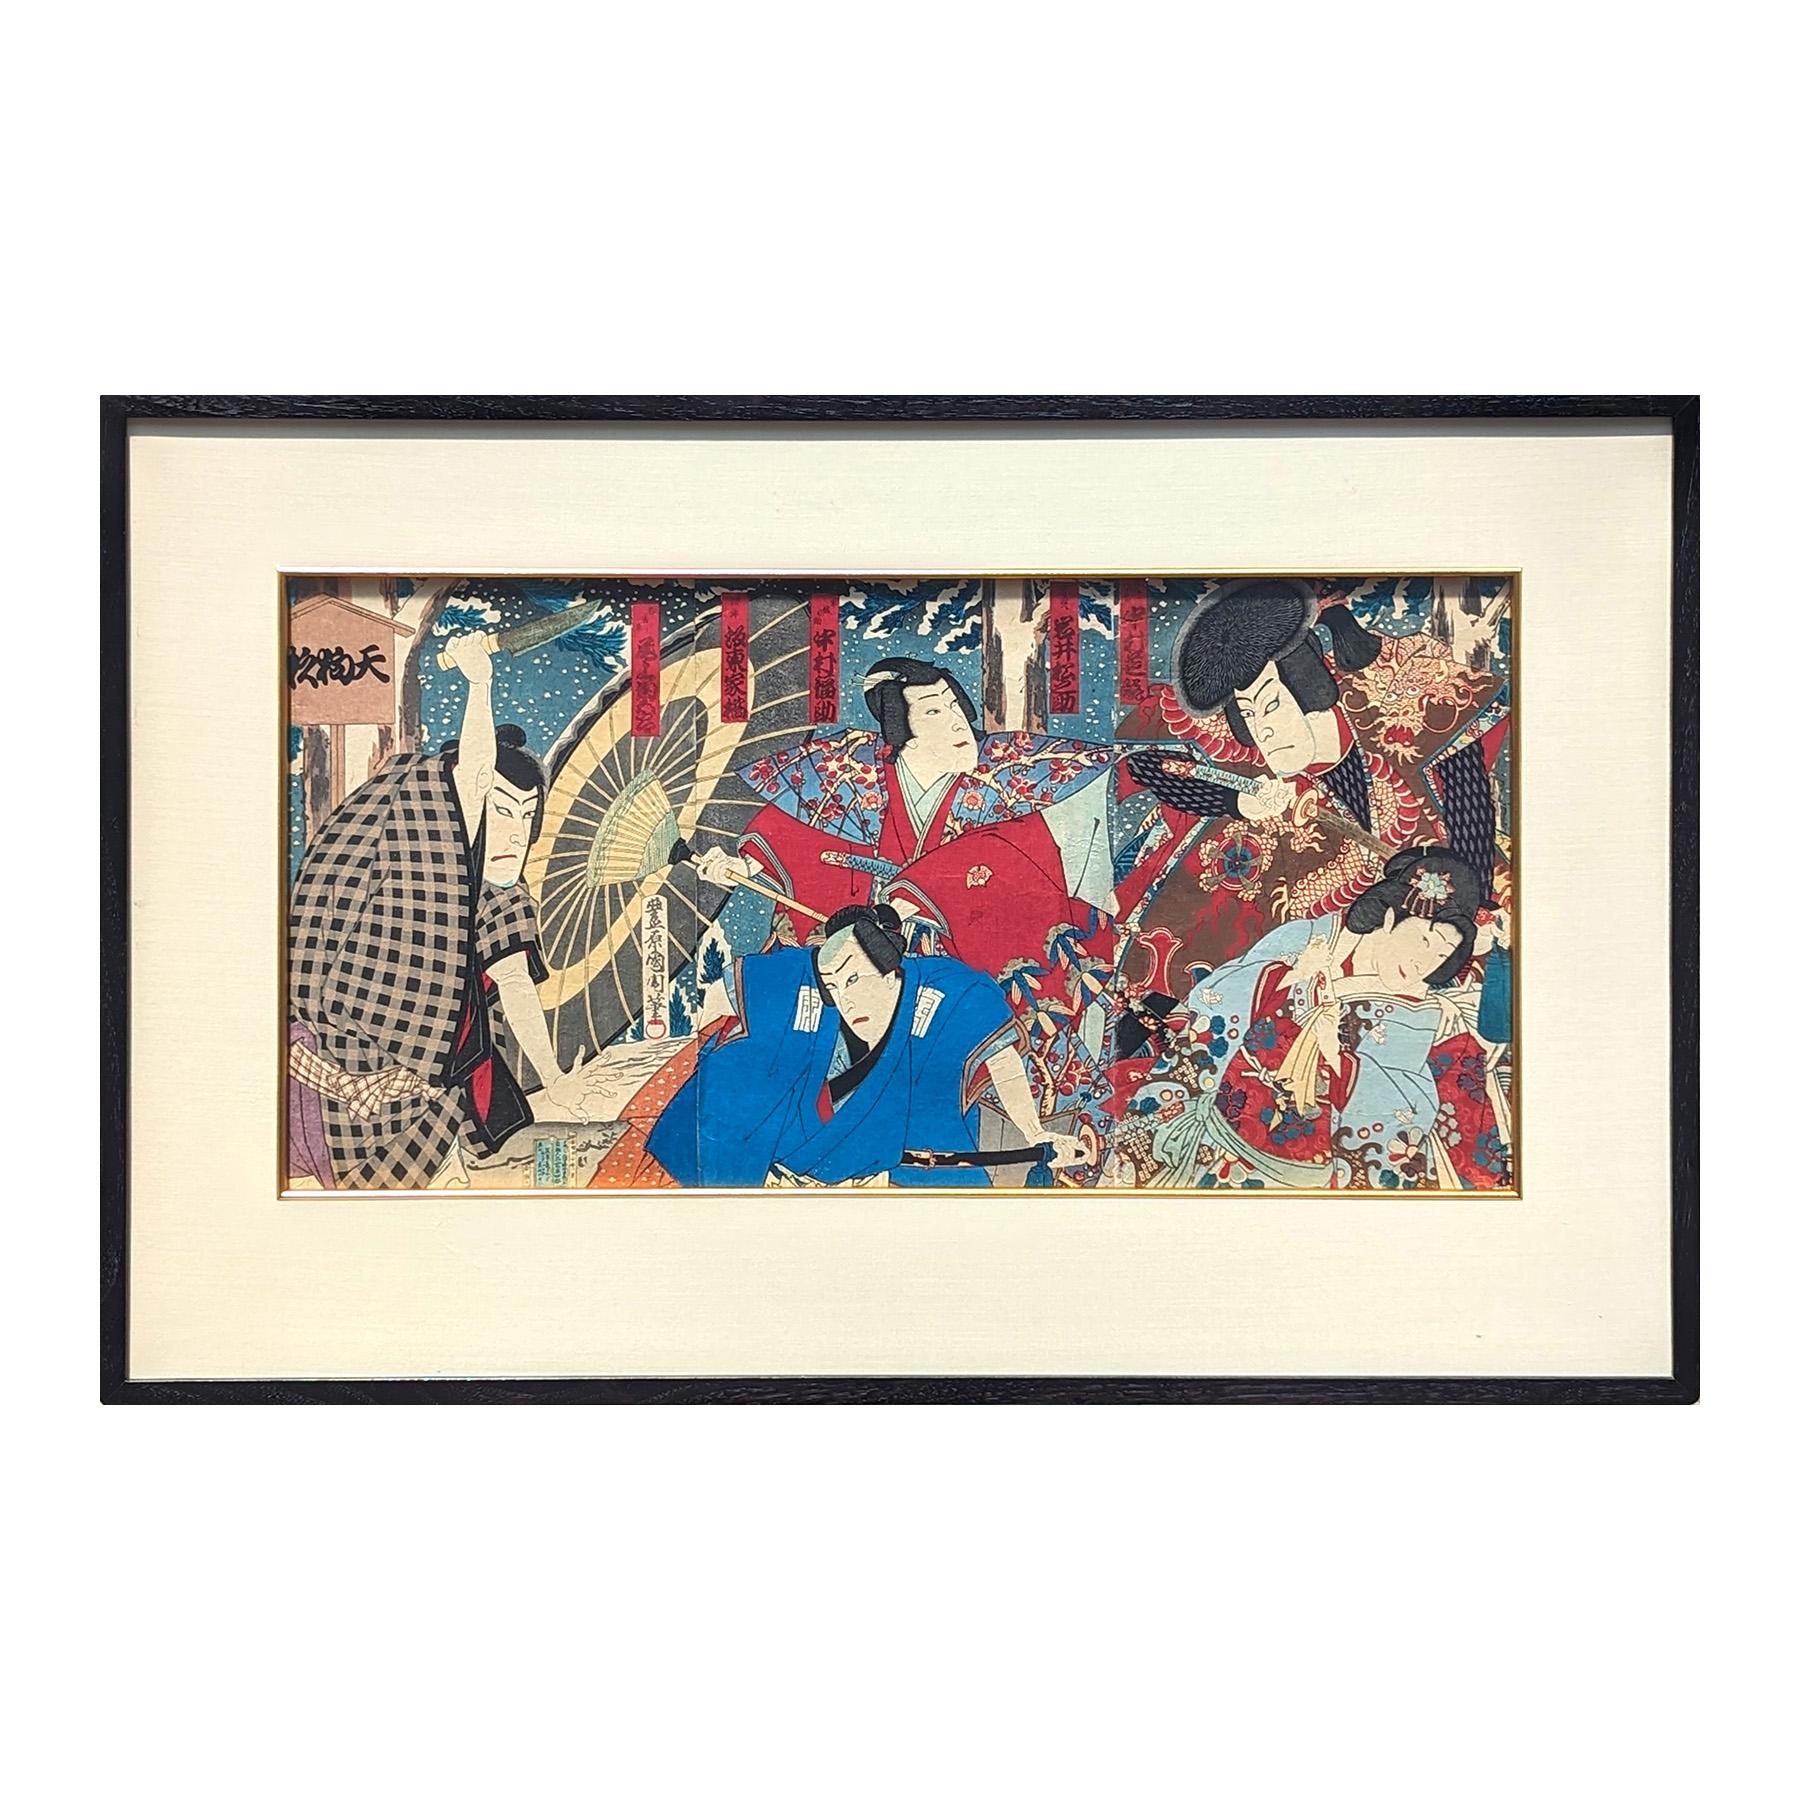 Colorful woodblock print by Japanese artist Toyohara Kunichika. The work features elaborately dressed kabuki actors in the middle of a dynamic scene. Currently hung in a black frame with a light cream matting and gold accents.

Dimensions Without